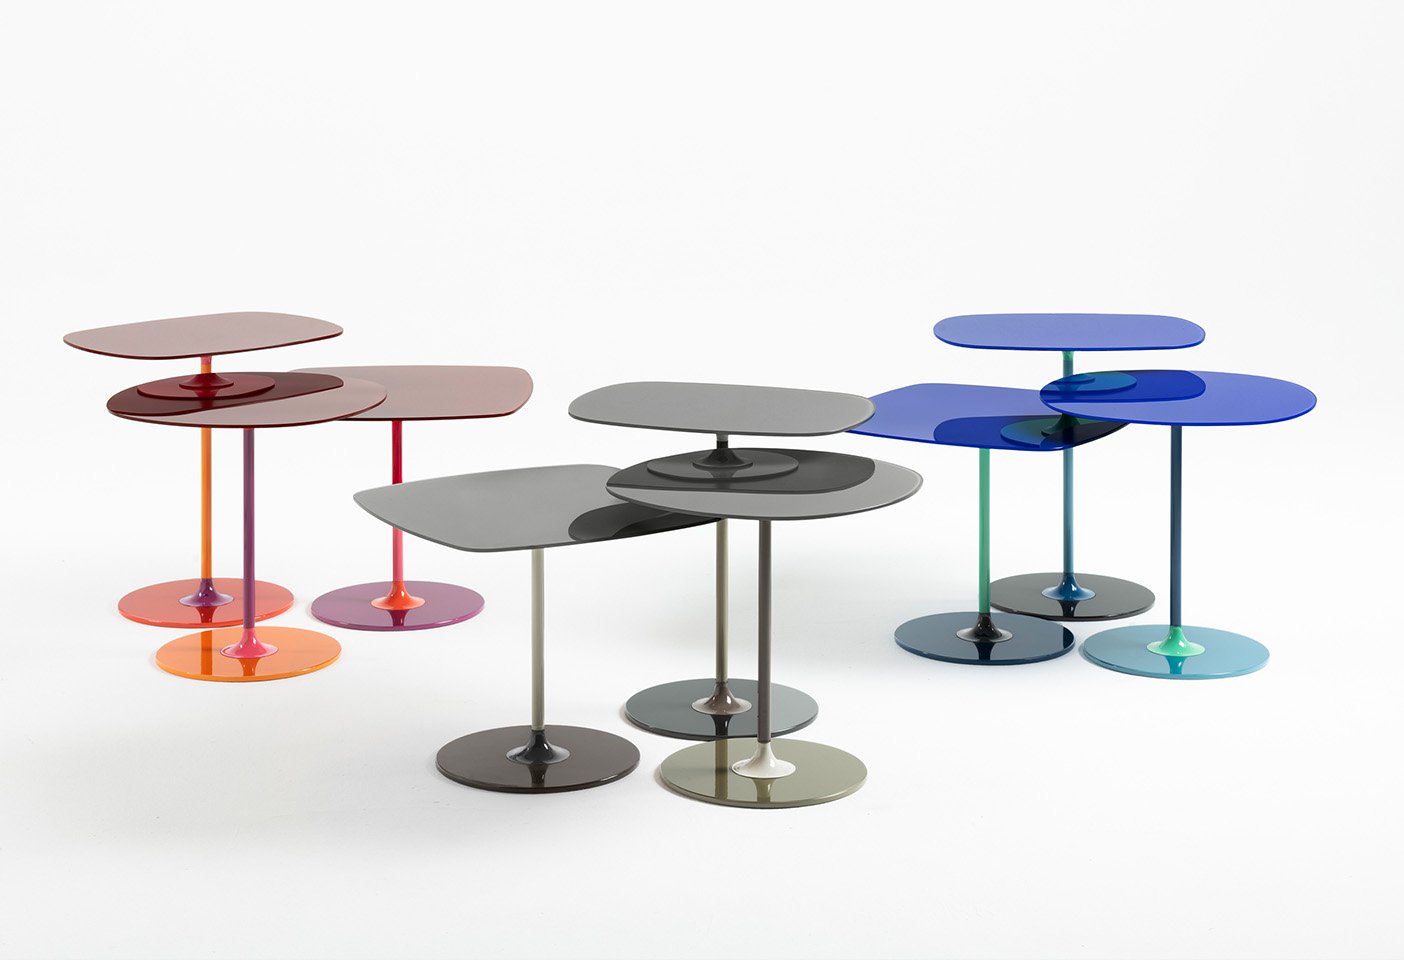 The Thierry tables in all their colour combinations and sizes designed by Piero Lissoni for Kartell. Photo c/o Kartell.